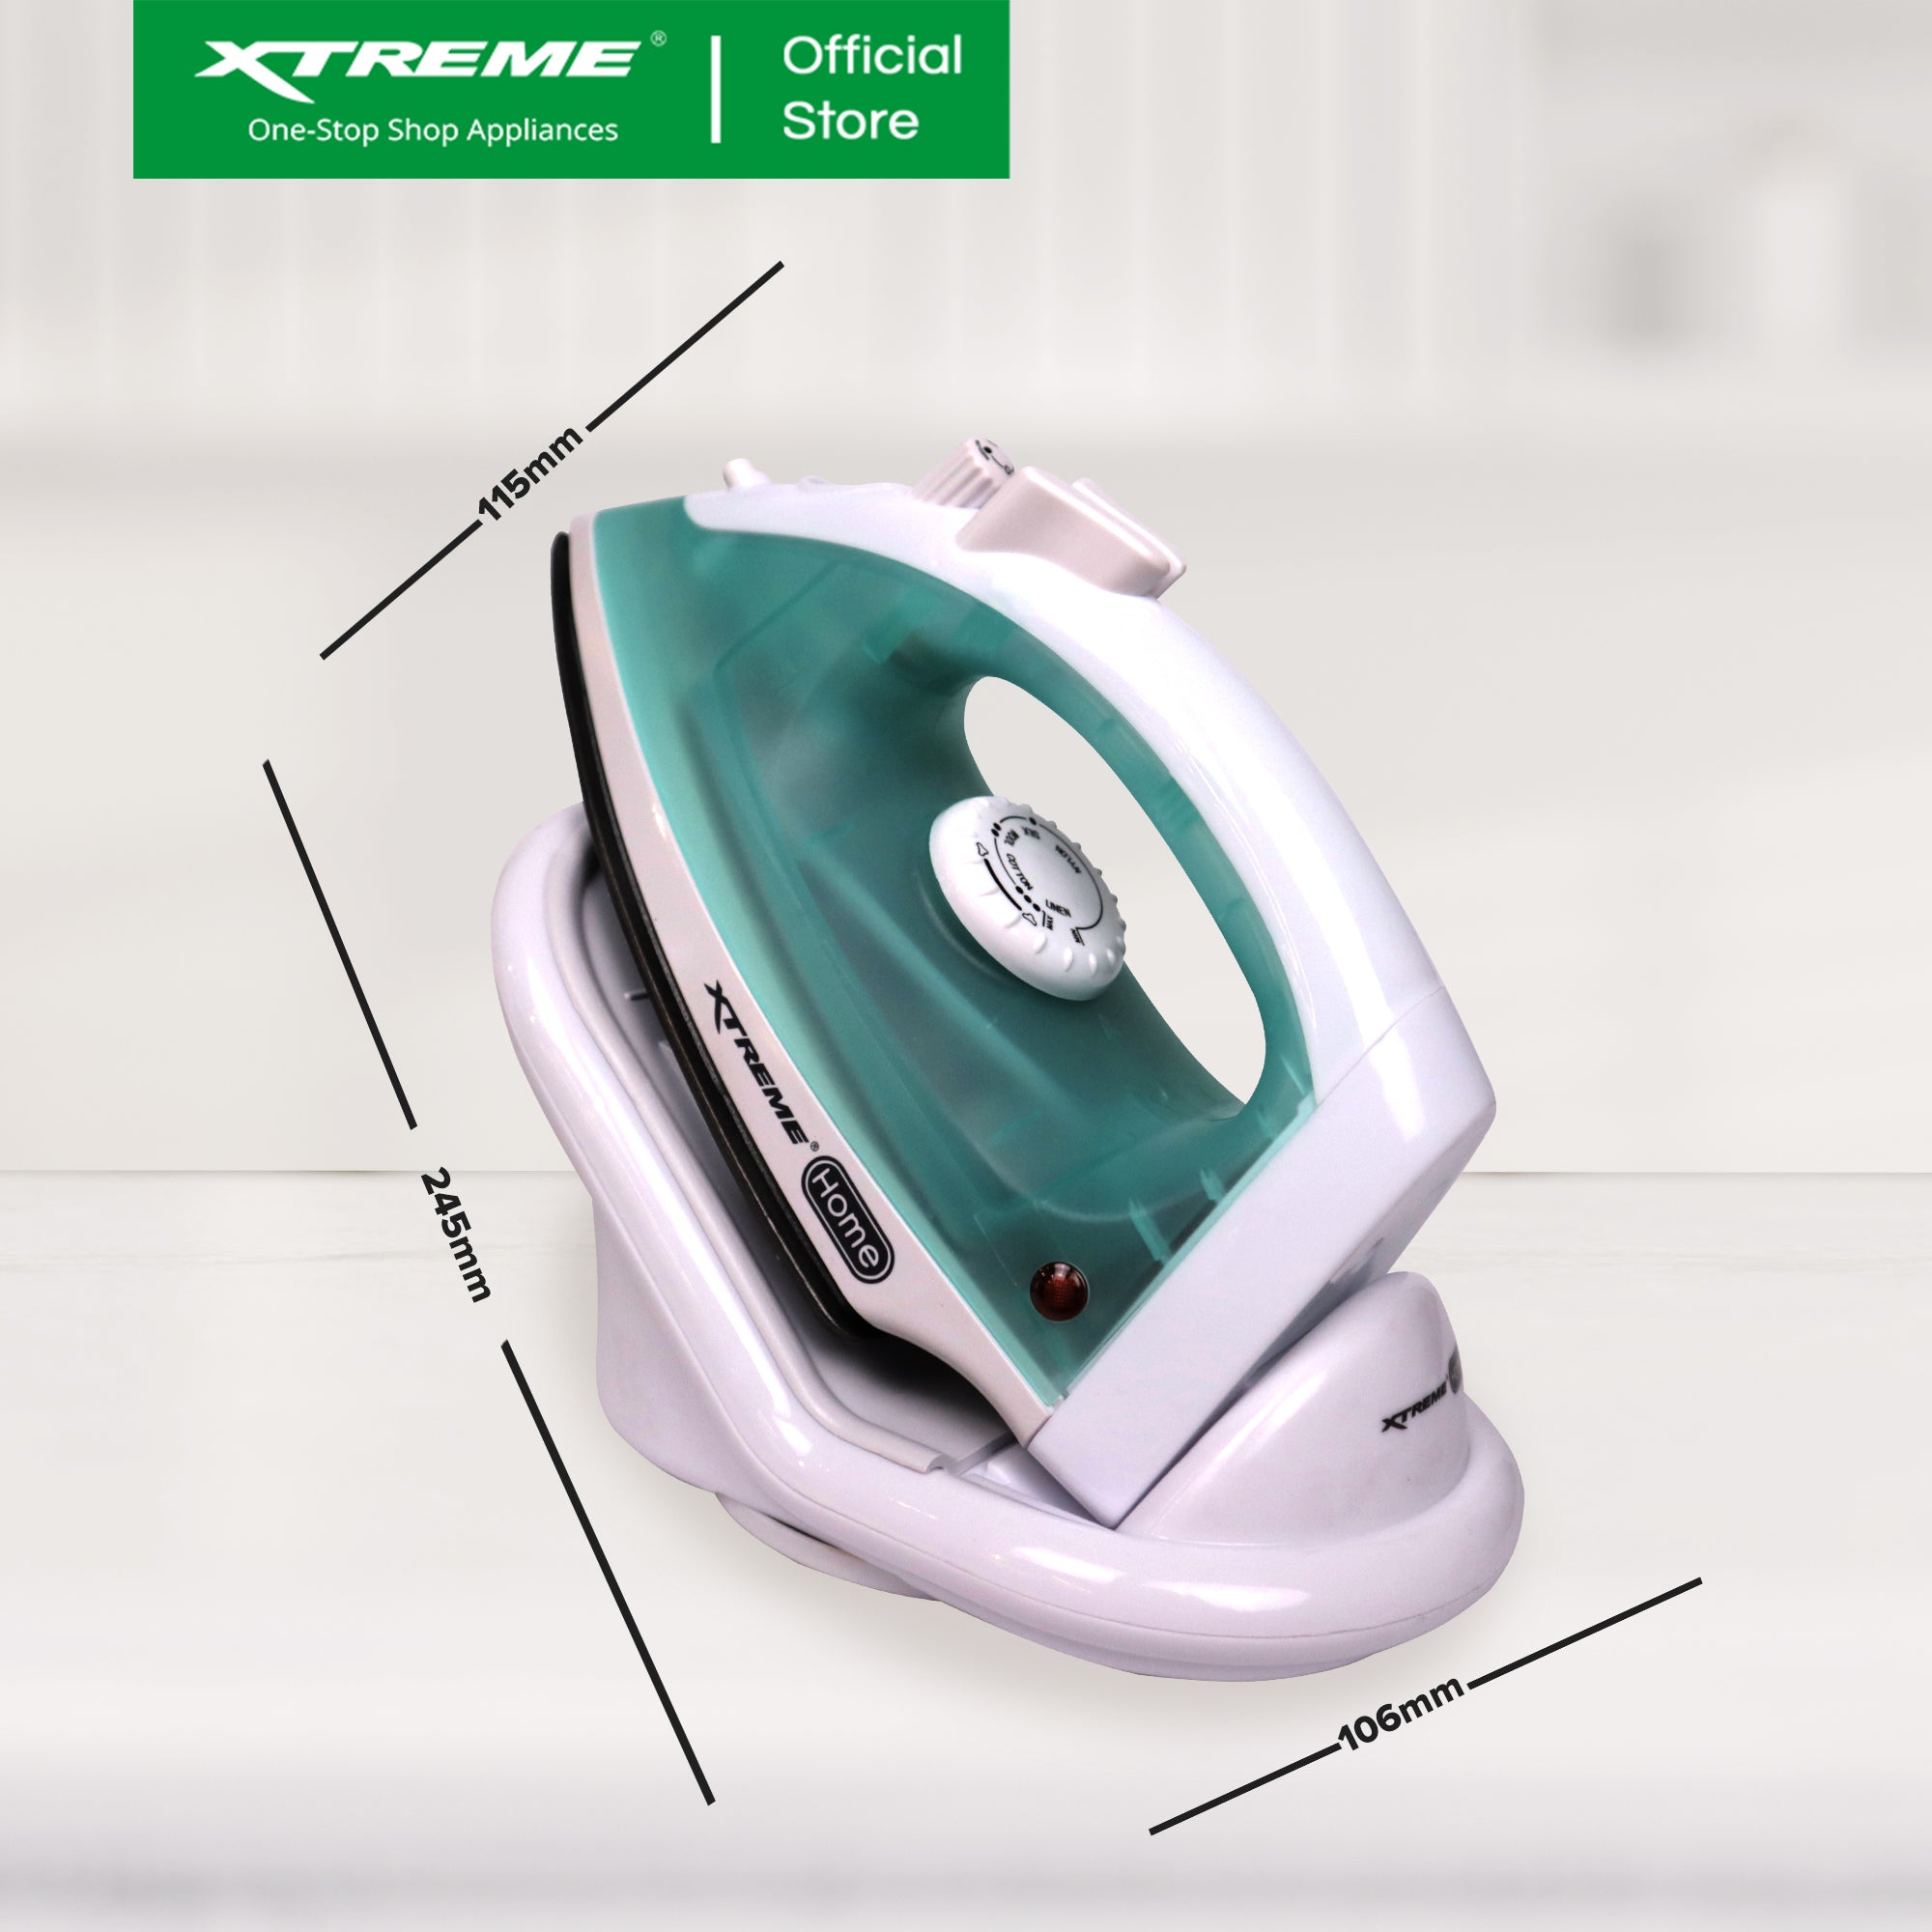 XTREME HOME Cordless Steam Iron with Spray (Green) | XH-IRONSTEAMGREEN